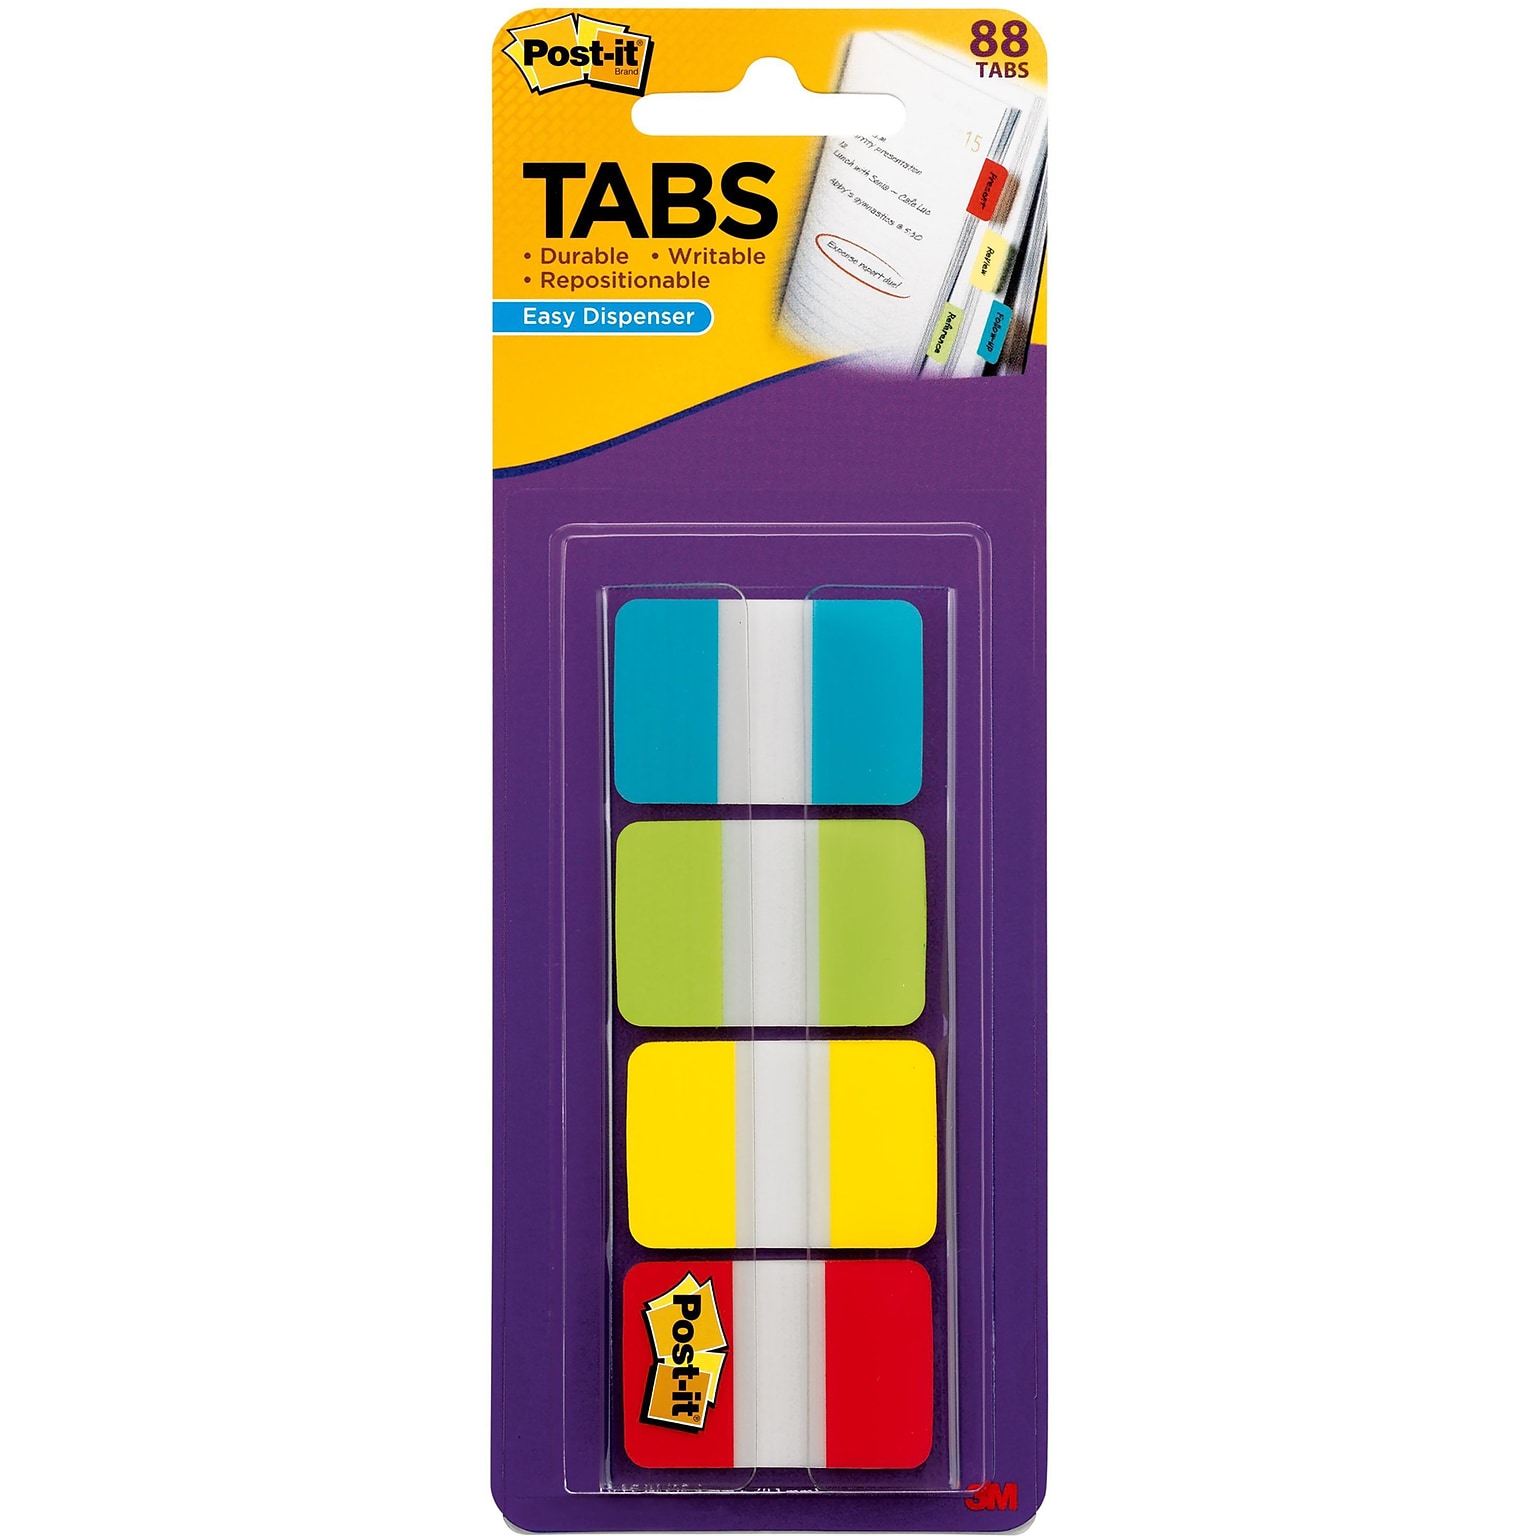 Post-it Tabs, 1 Wide, Solid, Assorted Colors, 88 Tabs/Pack (686-ALYR1IN)